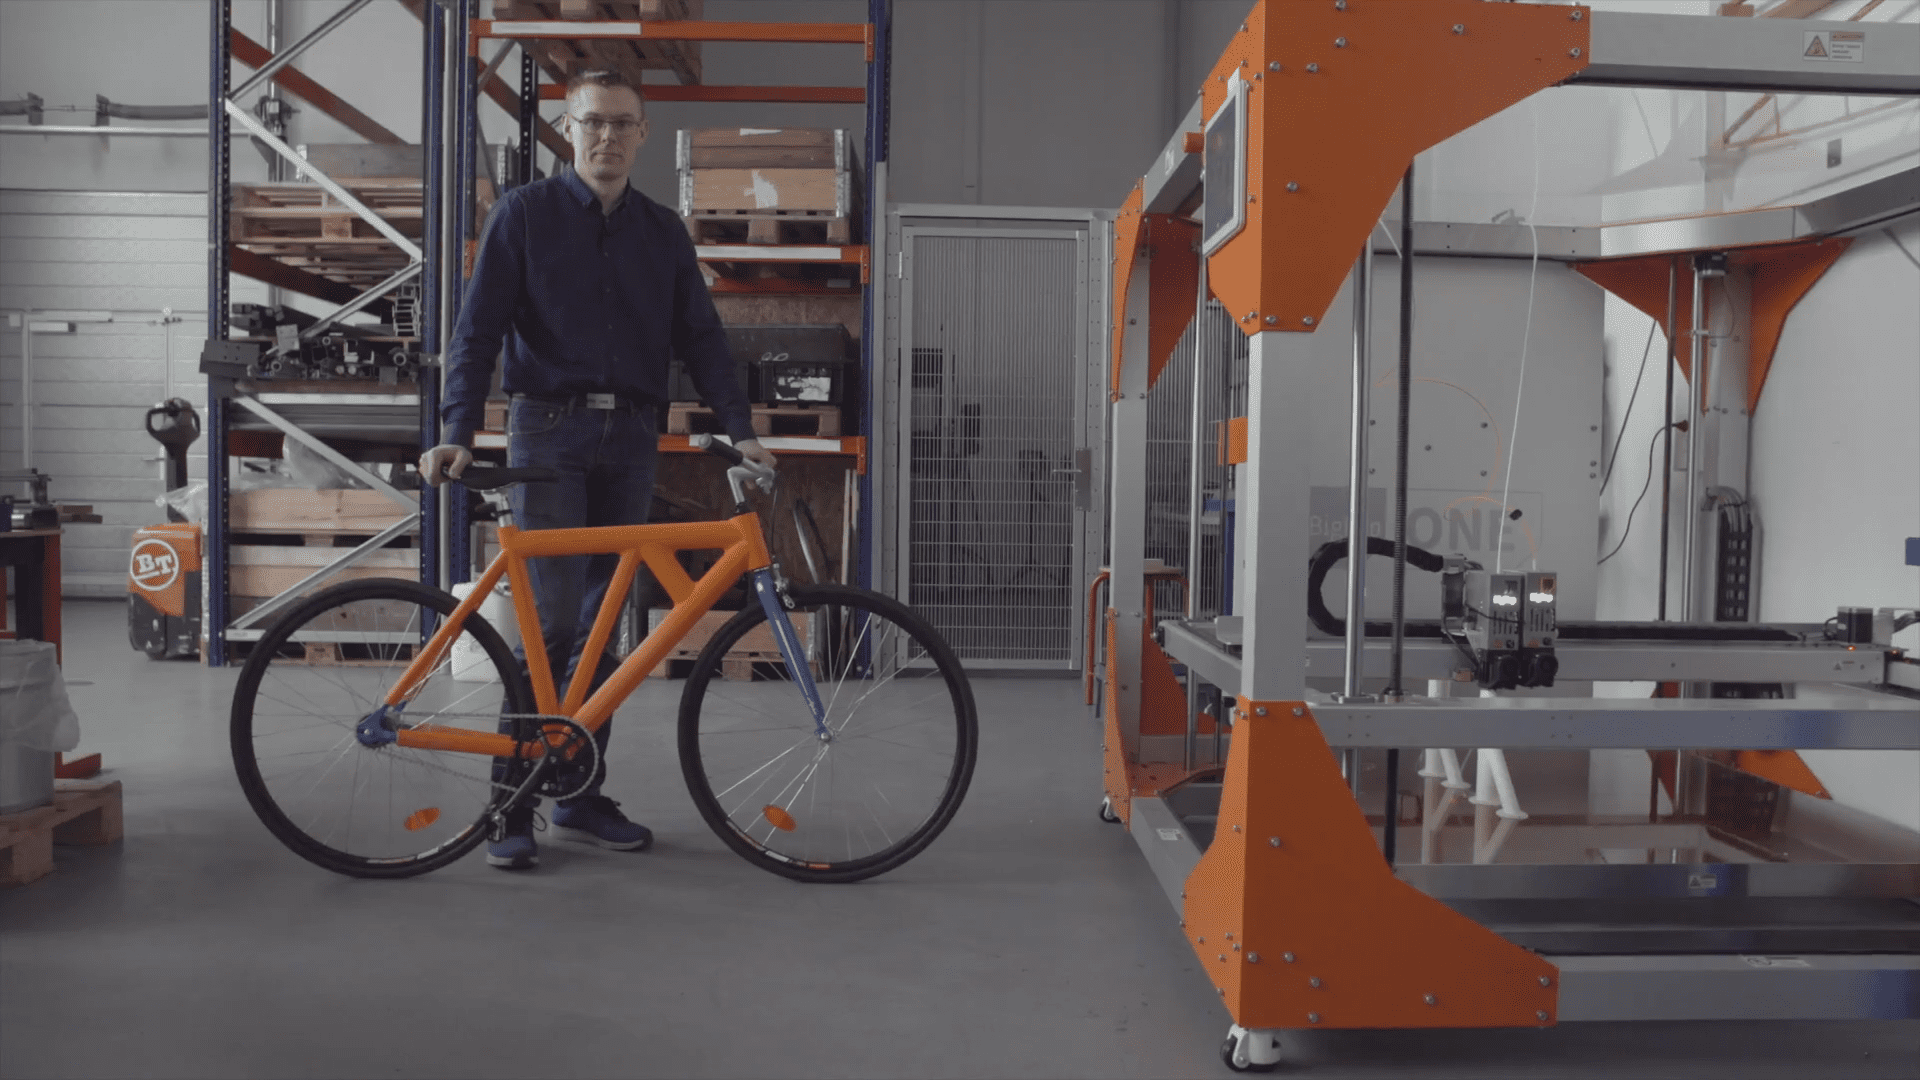 At Aalborg university, a fully functional bicycle frame was 3D printed, taking advantage of their BigRep 3D printer's large build volume.